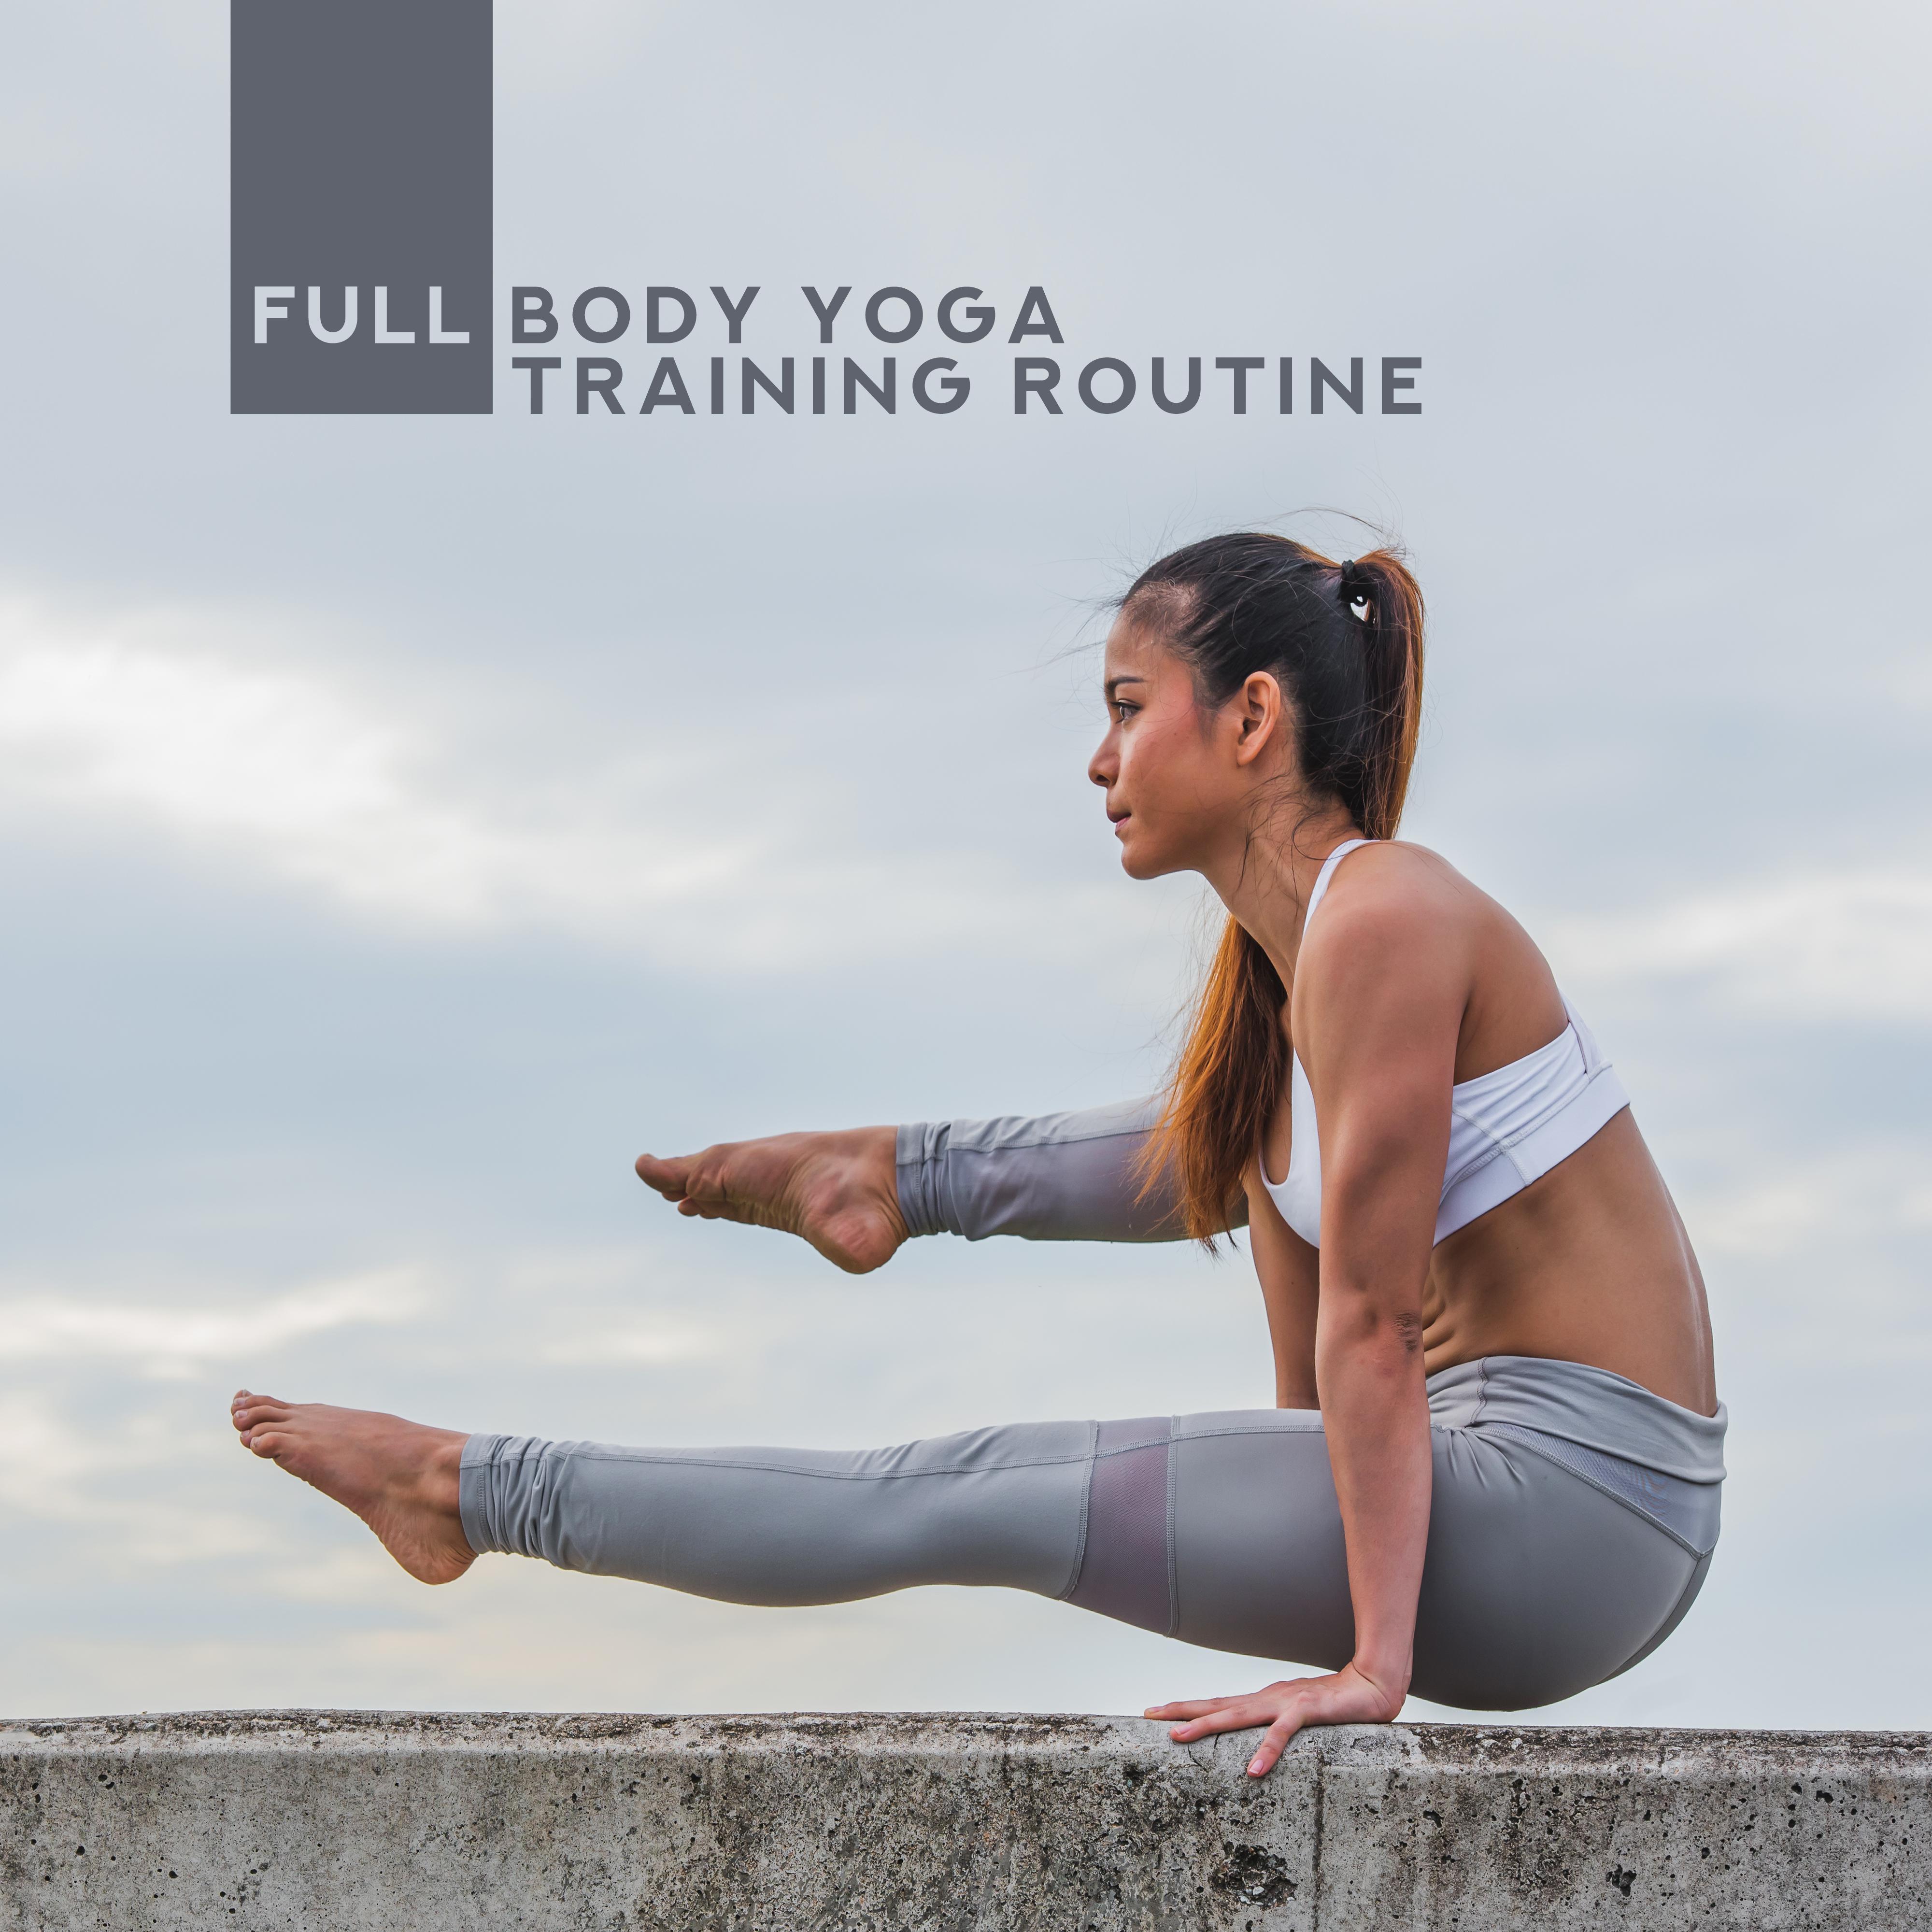 Full Body Yoga Training Routine: 2019 New Age Music for Slow Body Workout, Train All Hardest Yoga Poses, Keep Your Body & Mind Clean & Healthy